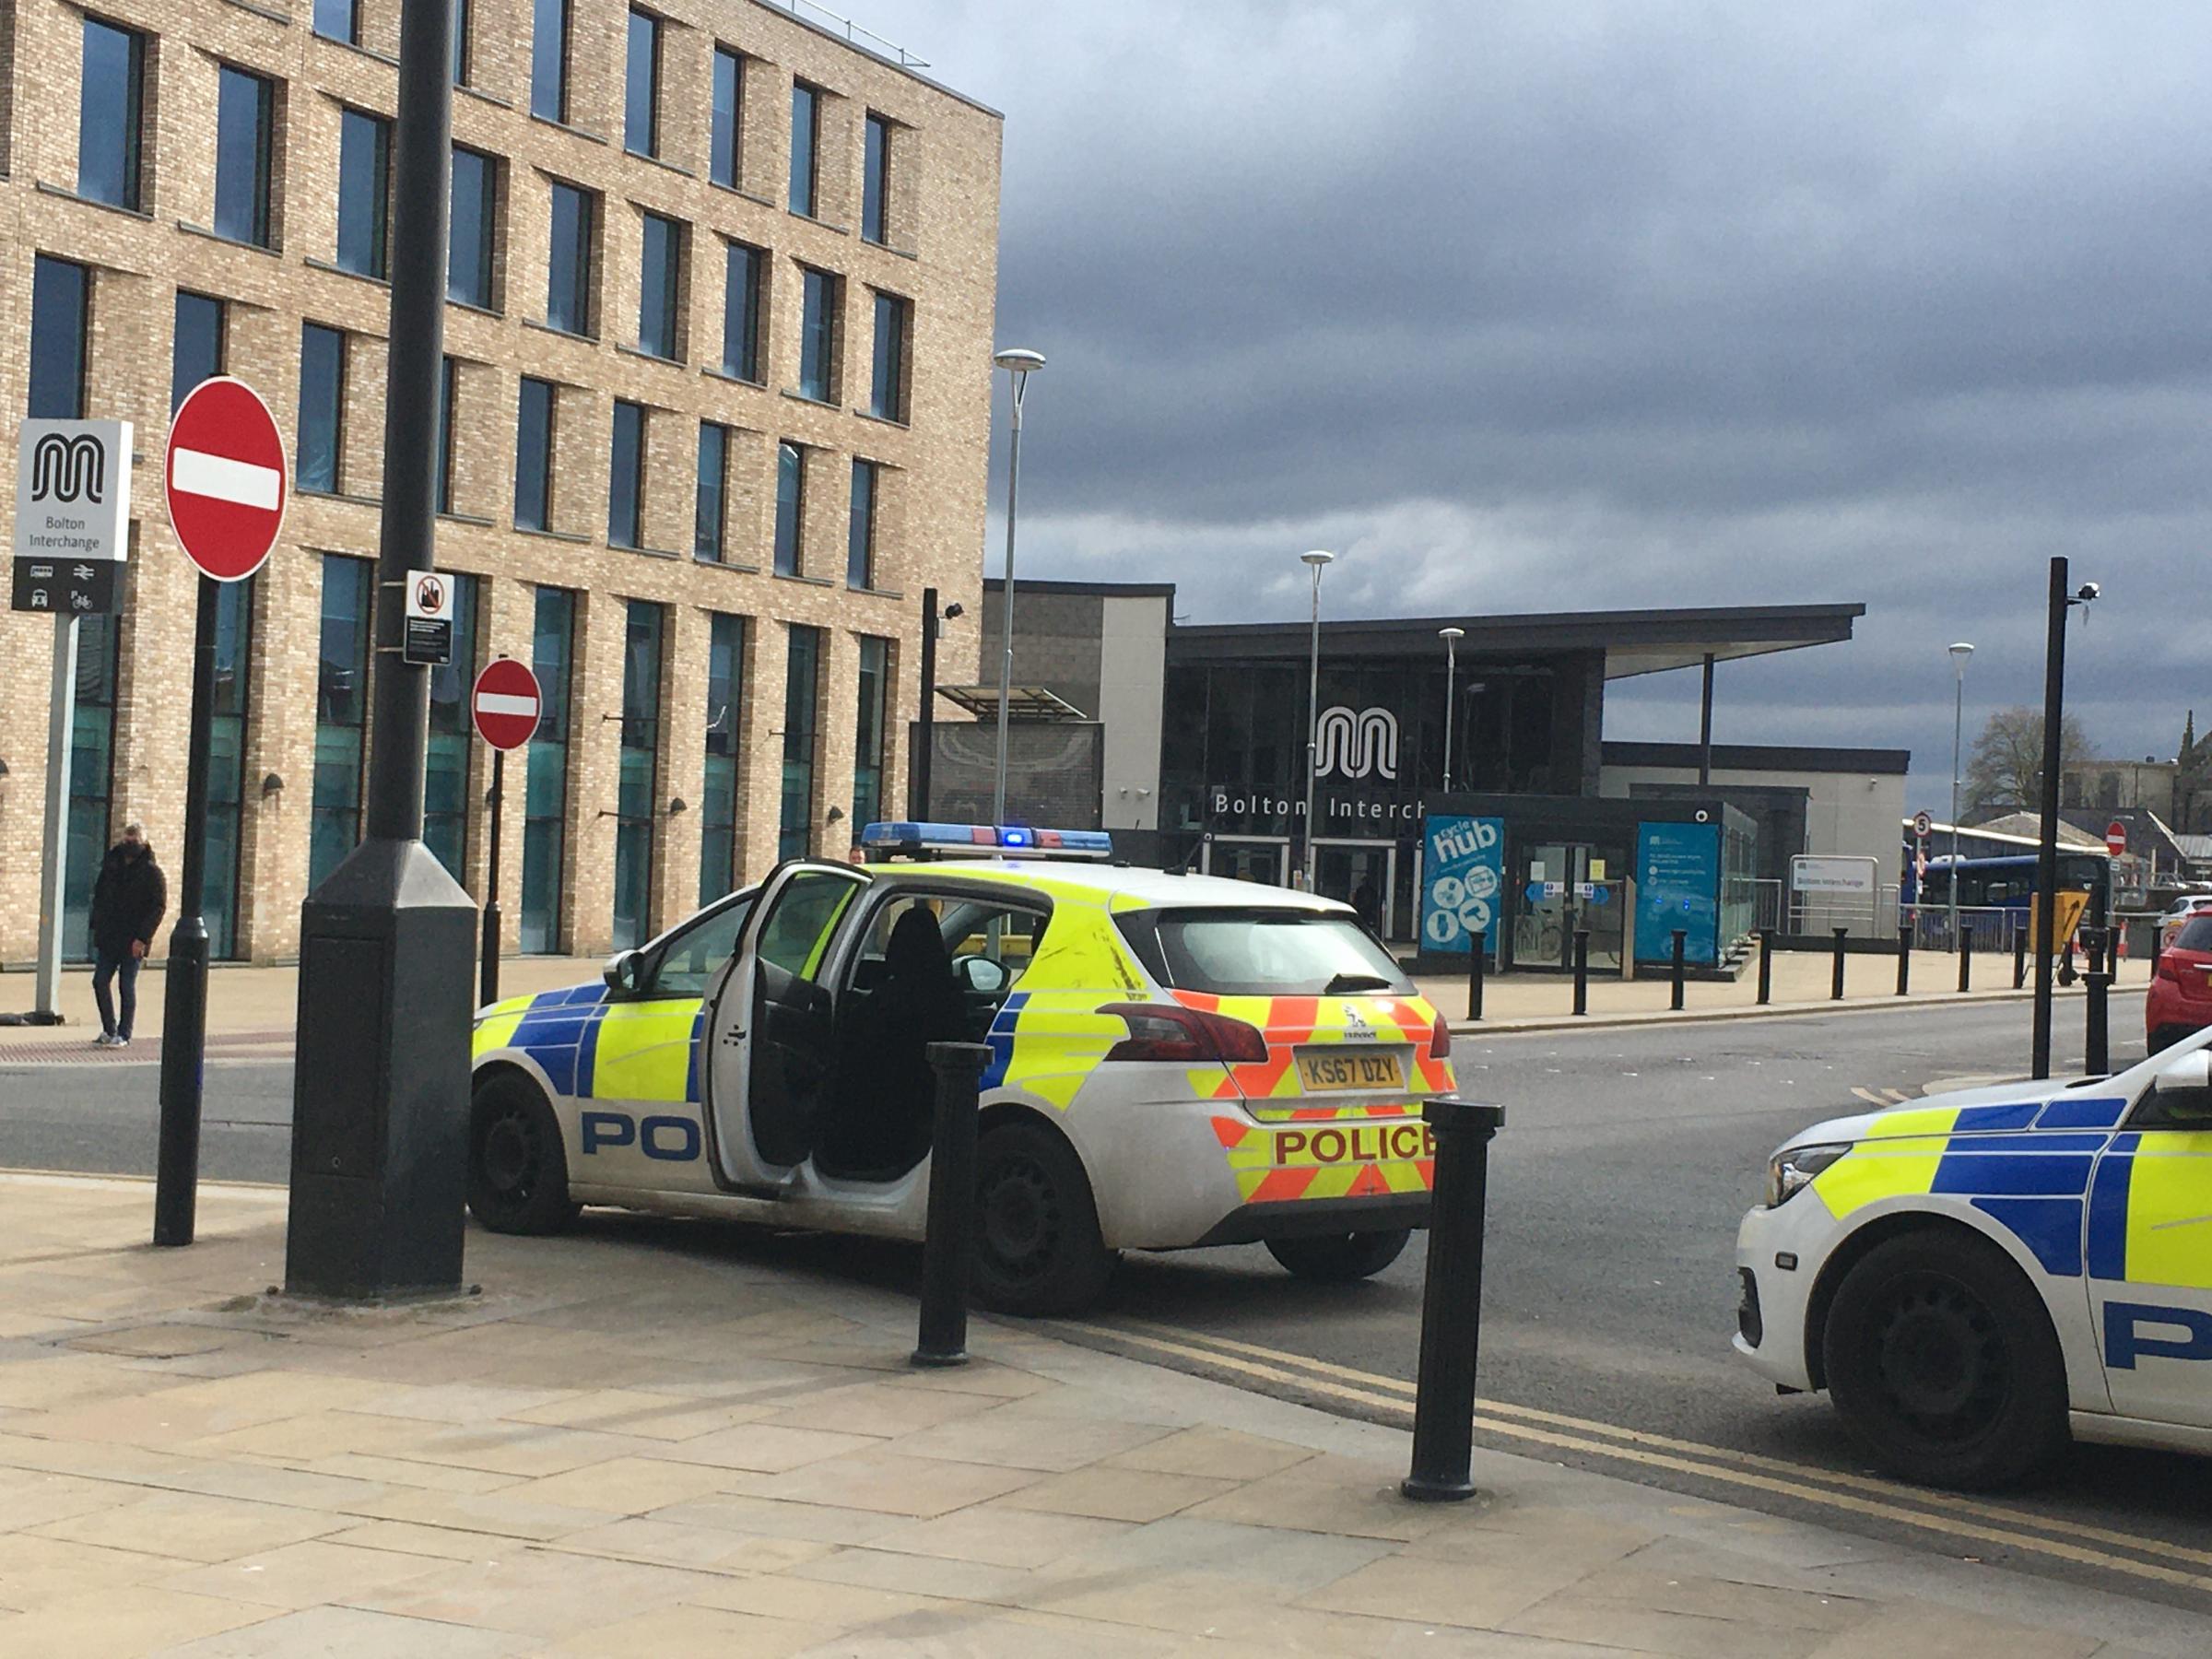 Police called to Bolton town centre following disturbance